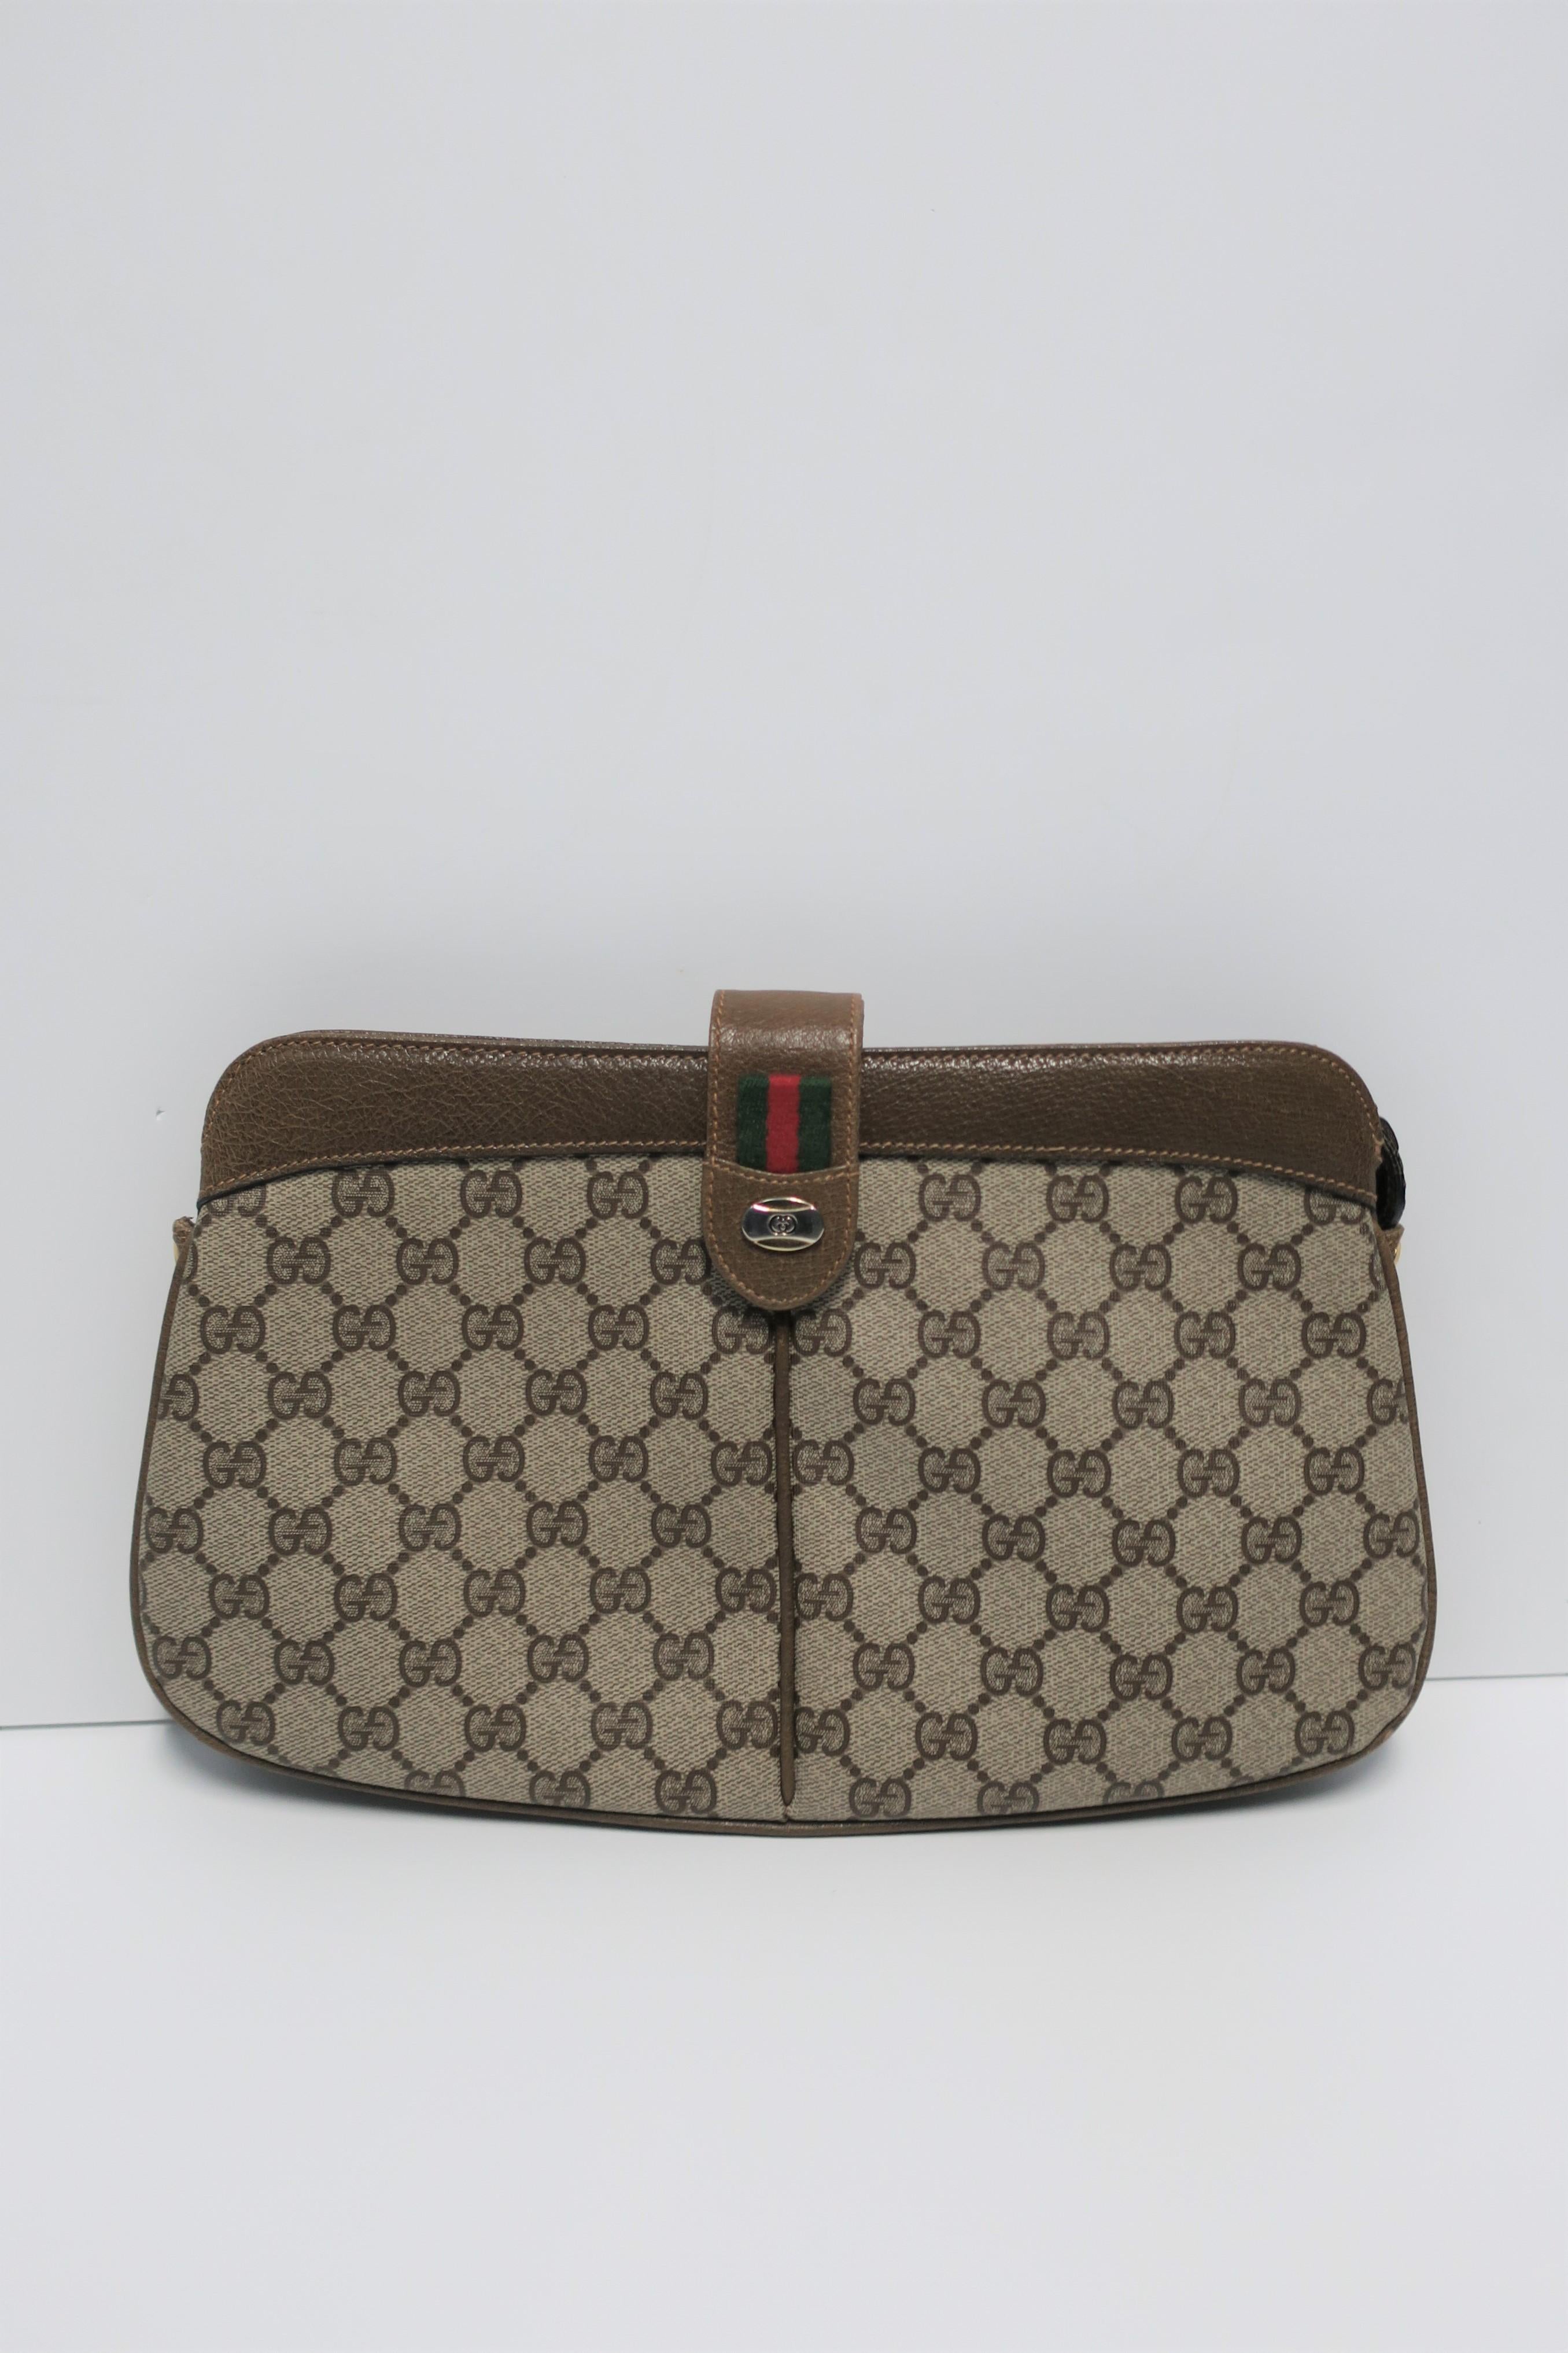 Gucci Leather and Canvas Handbag Clutch In Good Condition In New York, NY